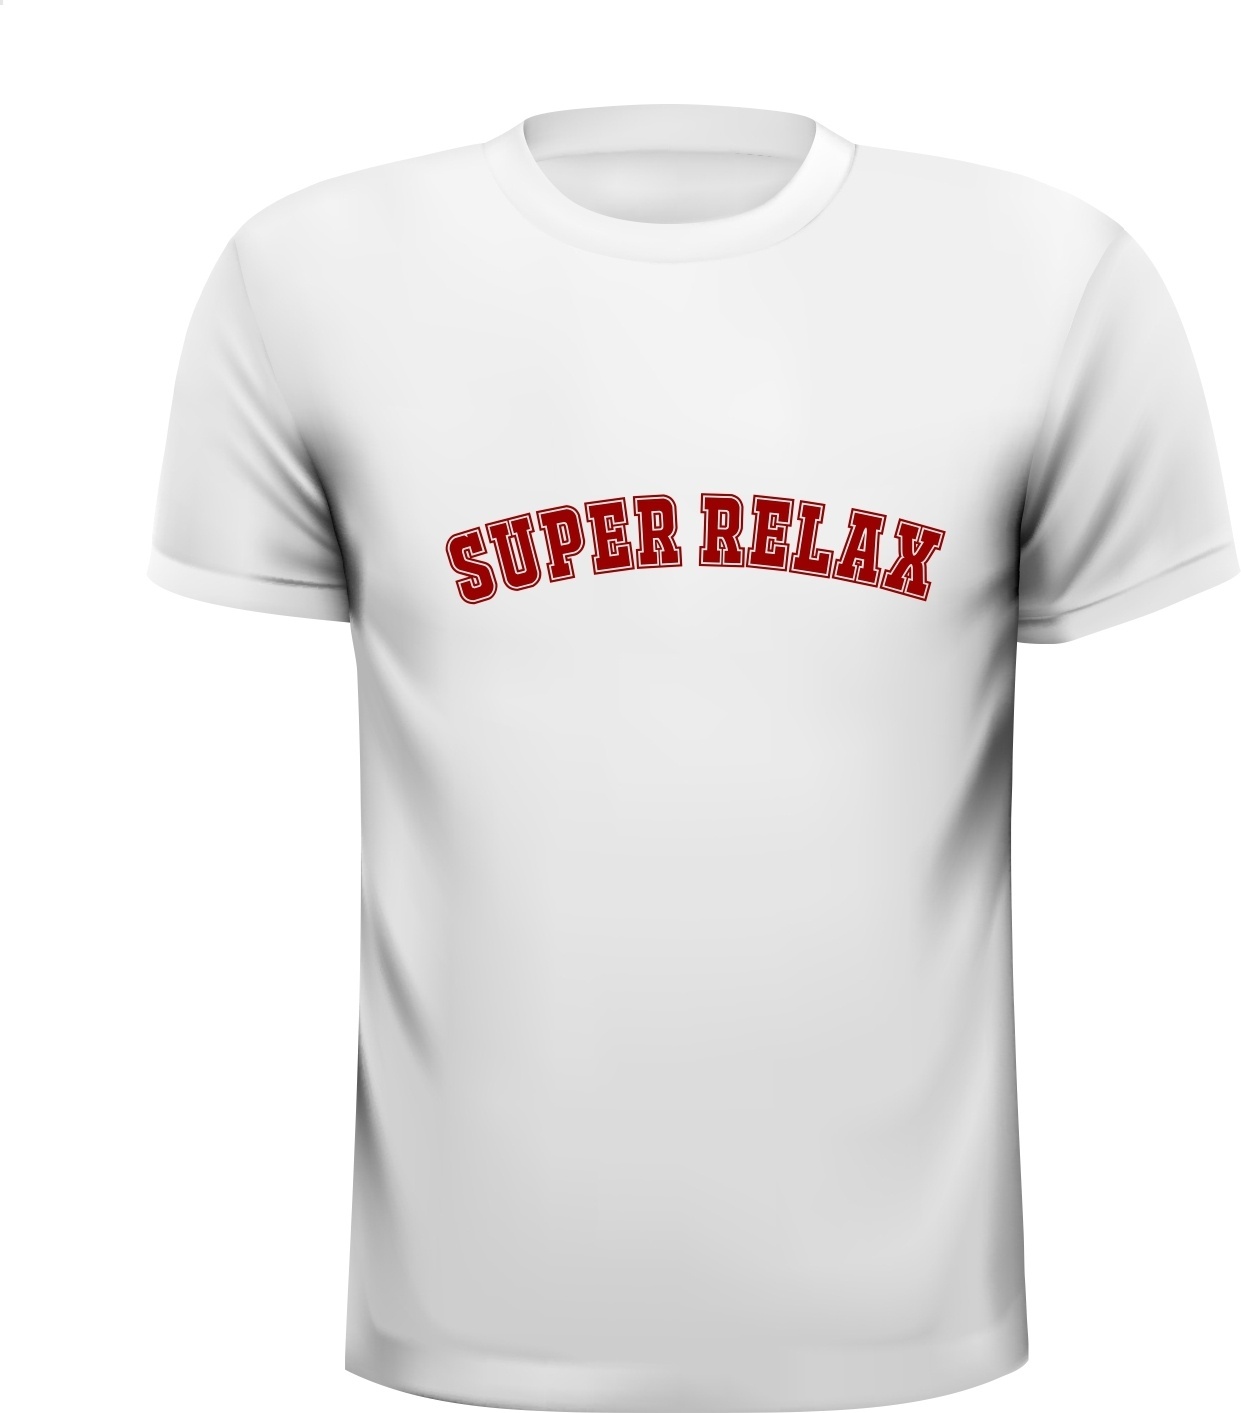 super relax wit shirt robijnrode letters